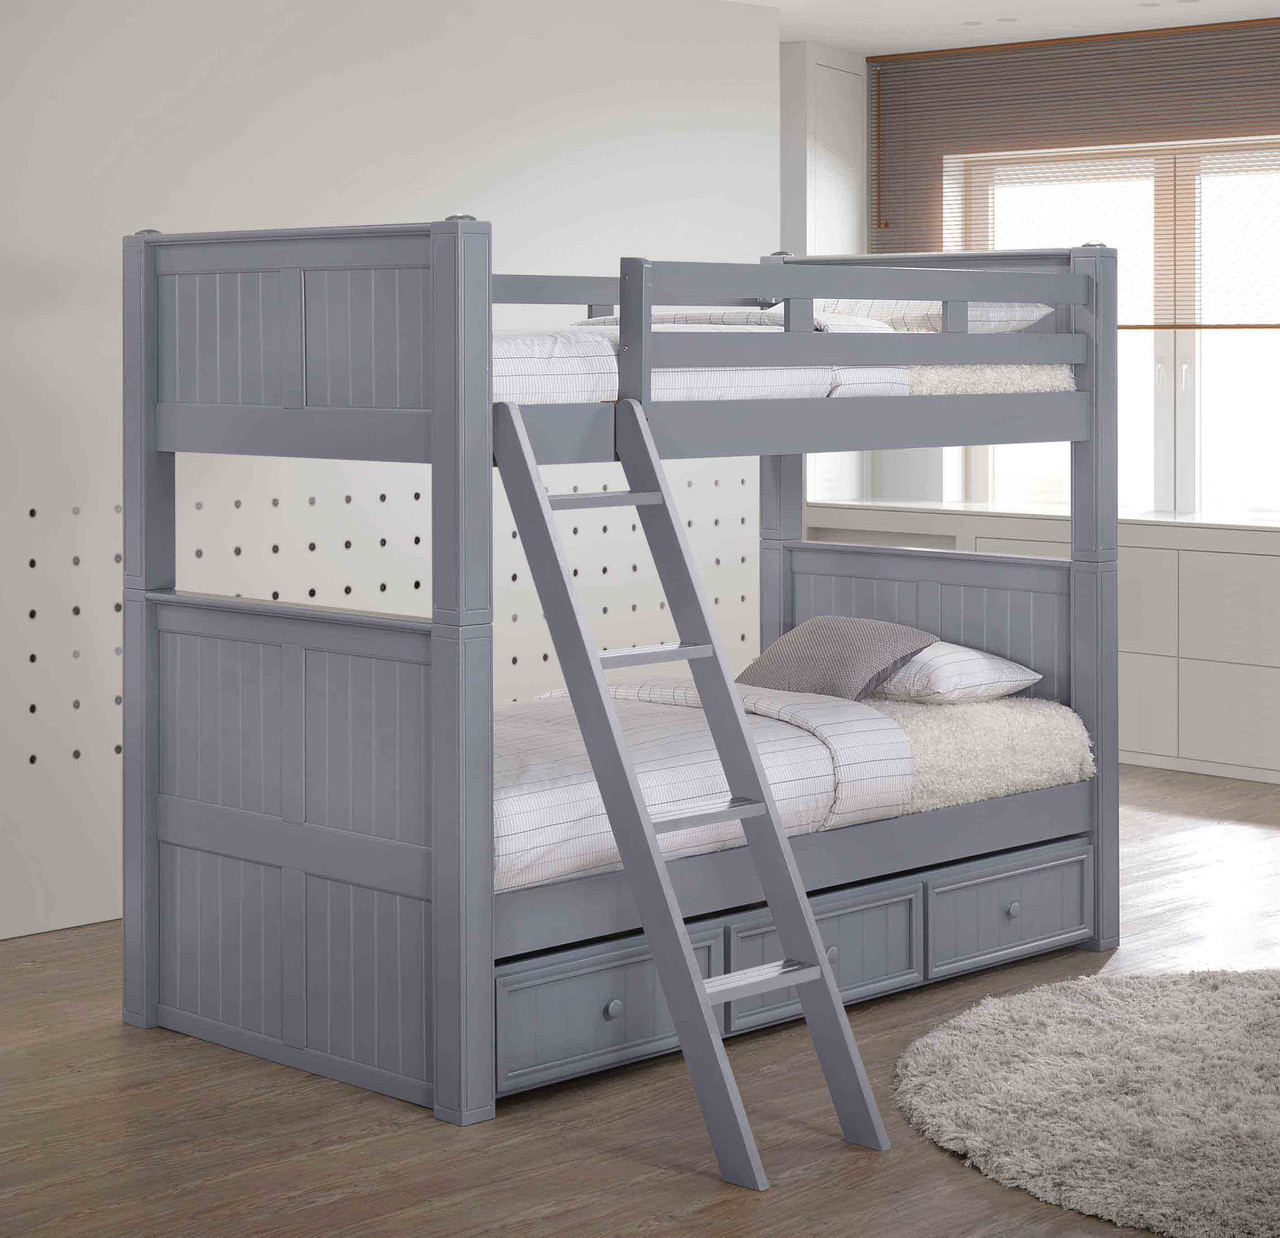 Dillon Twin XL over Twin XL Bunk Bed with Trundle or Storage